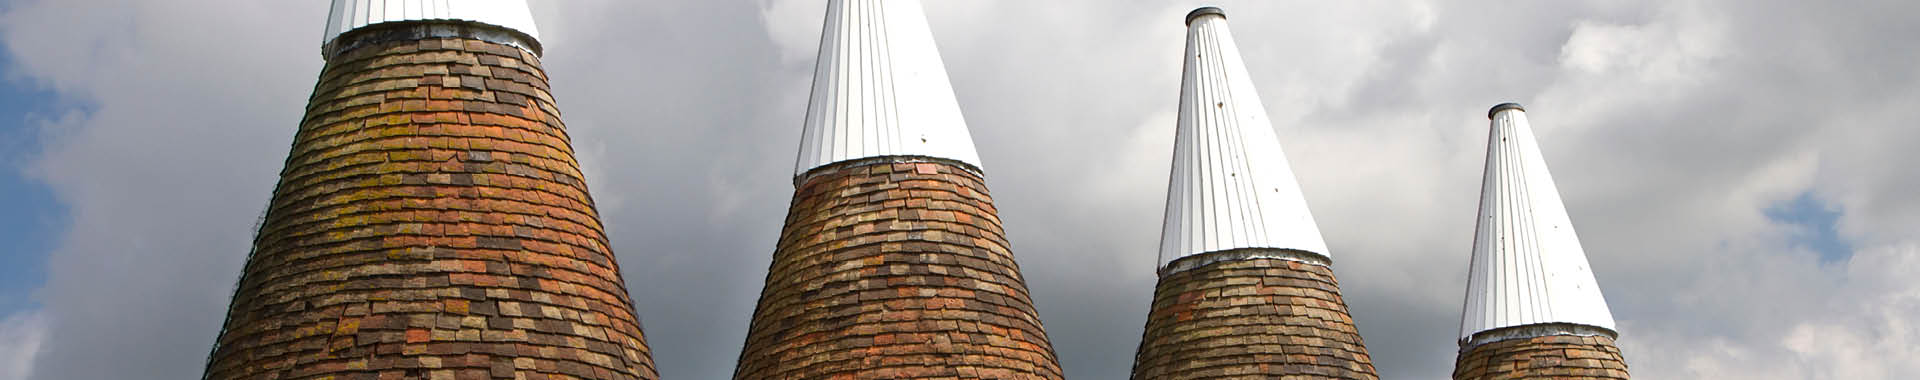 Photo of the rooftops of Kent oast houses